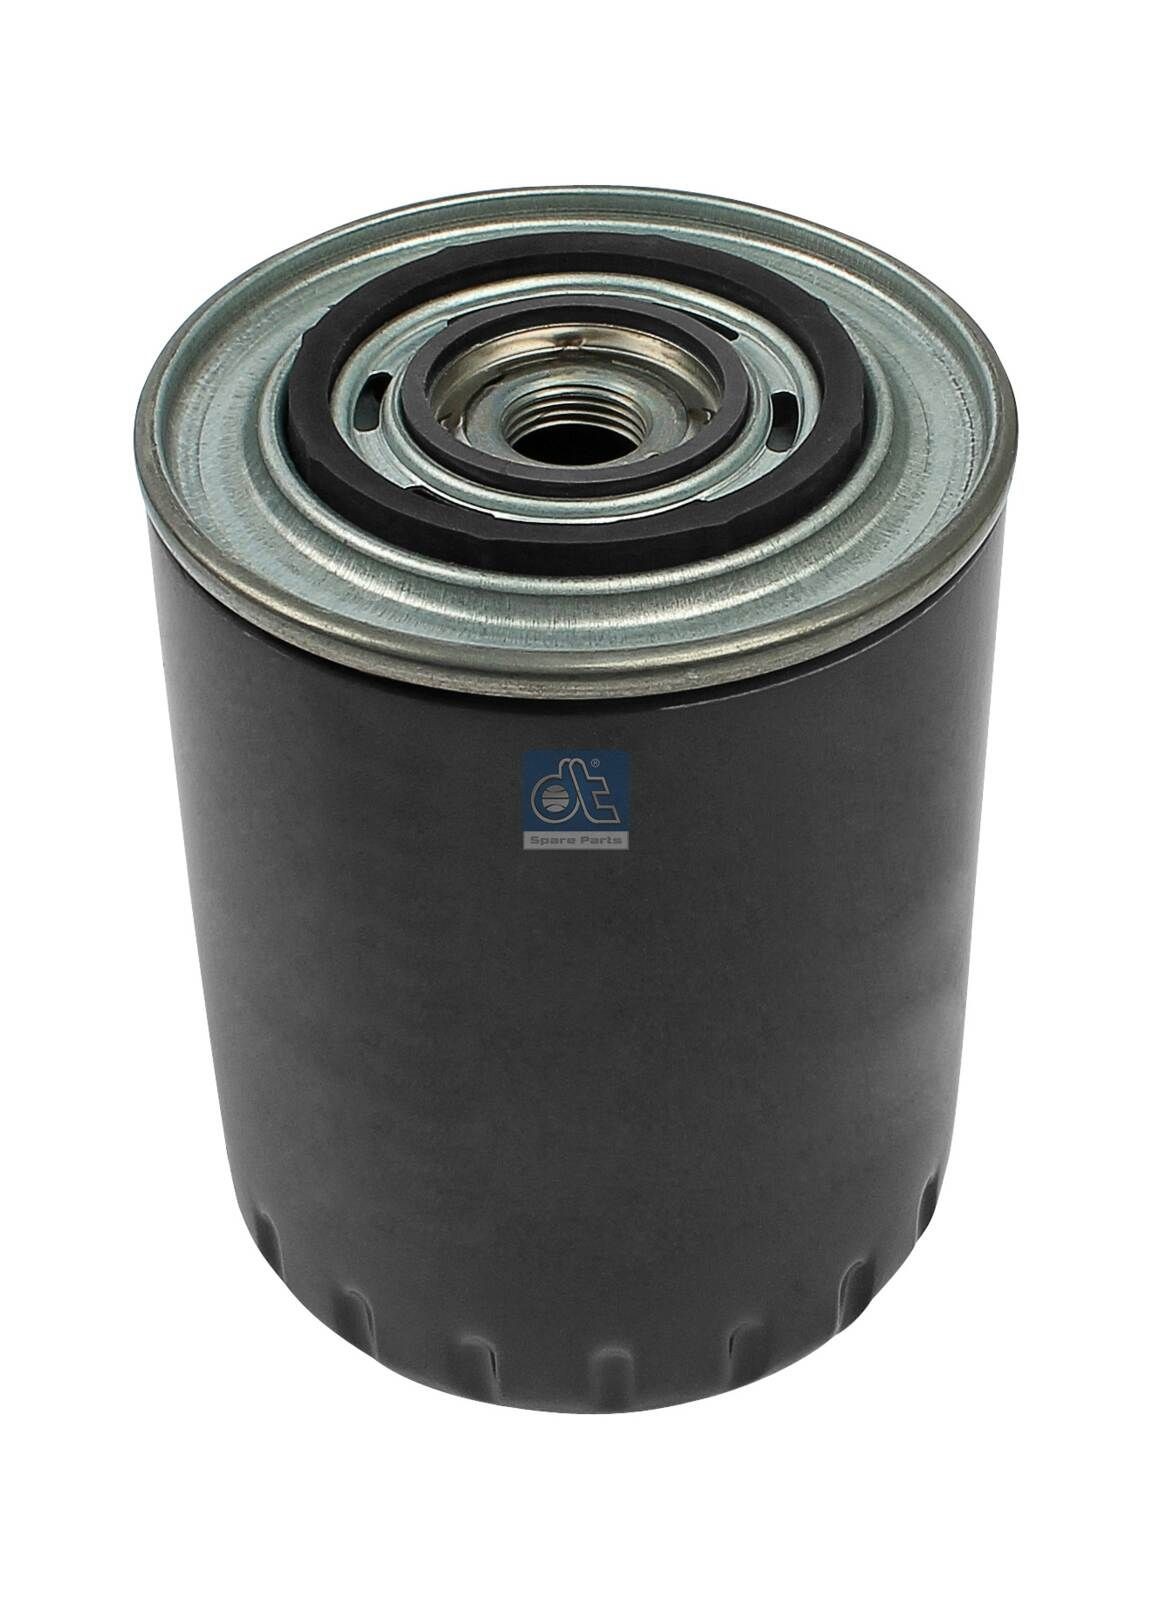 Opel MOVANO Engine oil filter 9975418 DT Spare Parts 6.24212 online buy